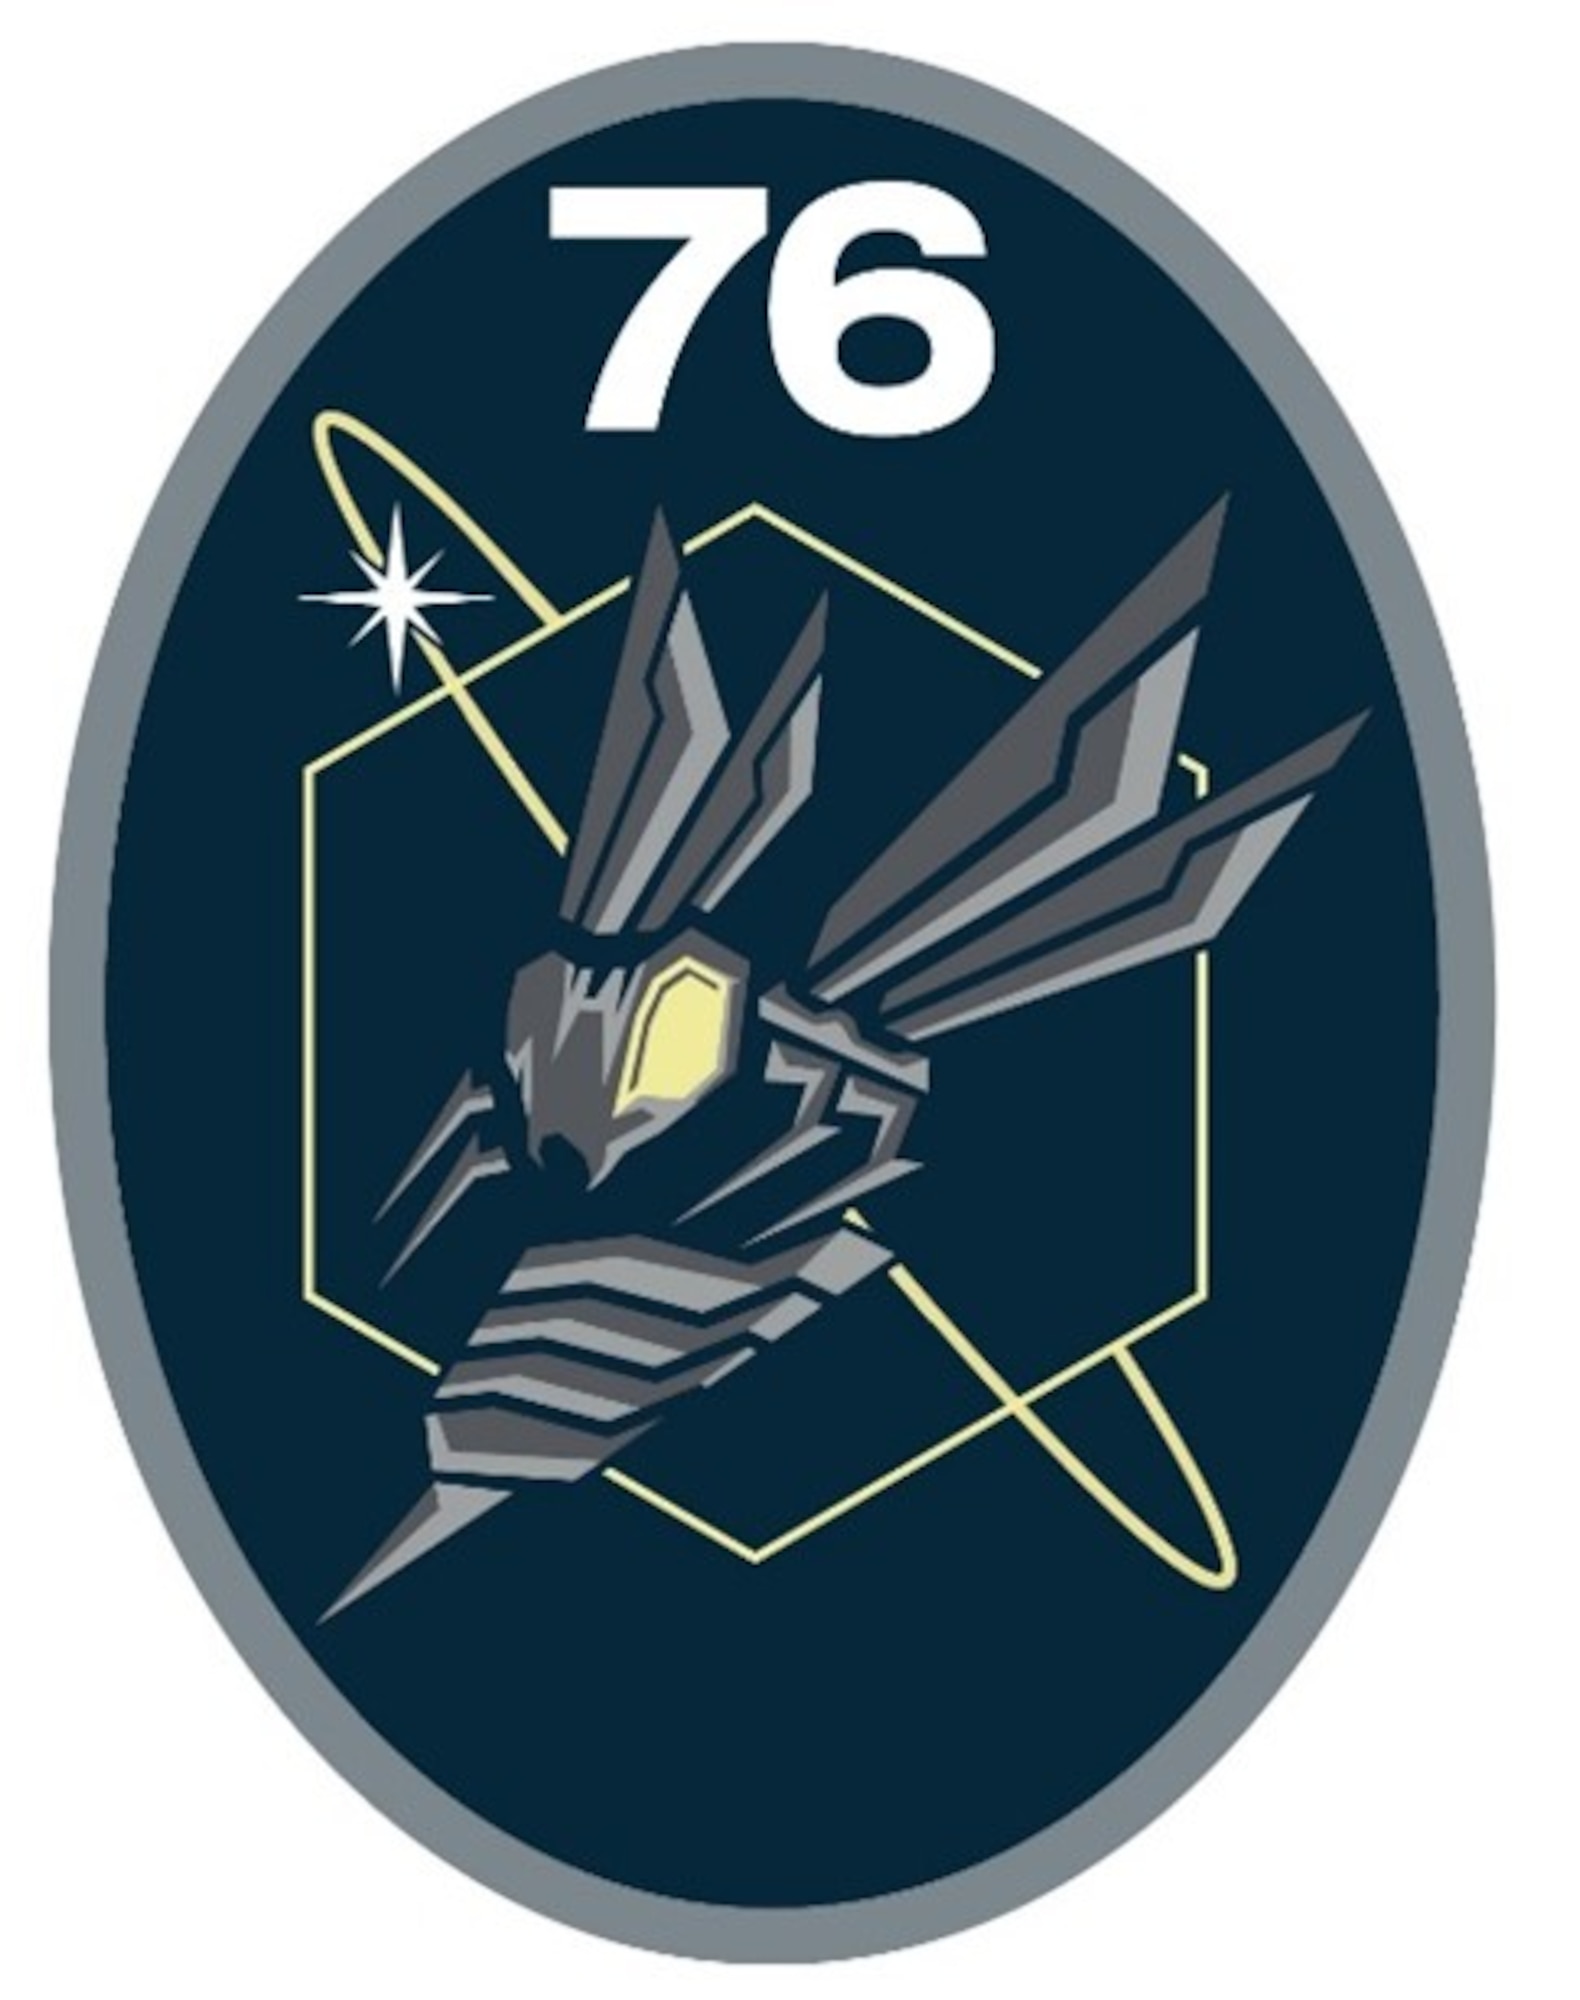 DEL 7 activates new 76th ISRS > Peterson and Schriever Space Force Base ...